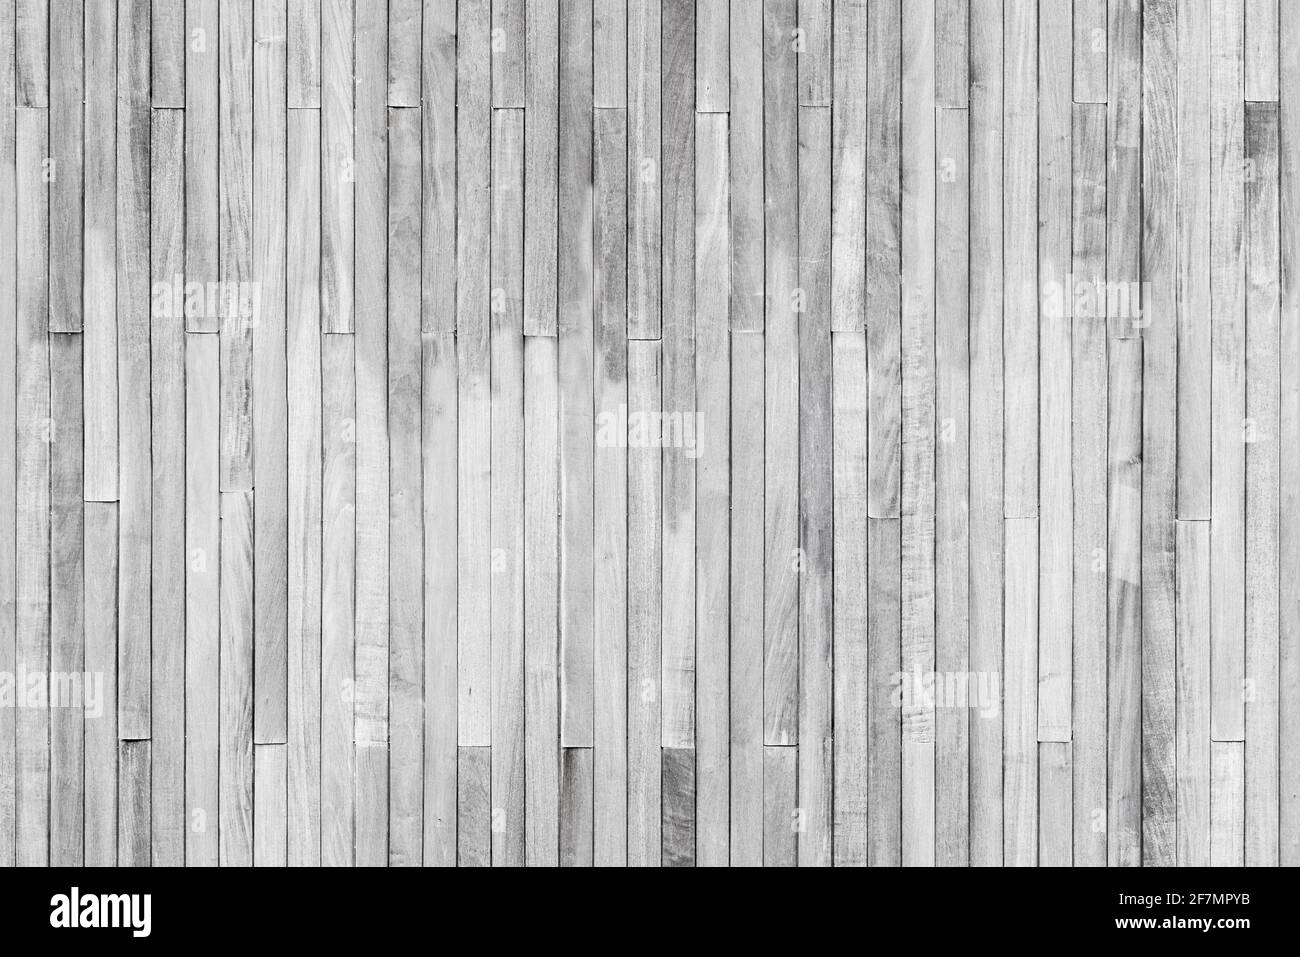 Grungy white wooden wall seamless texture, front view, flat background photo Stock Photo